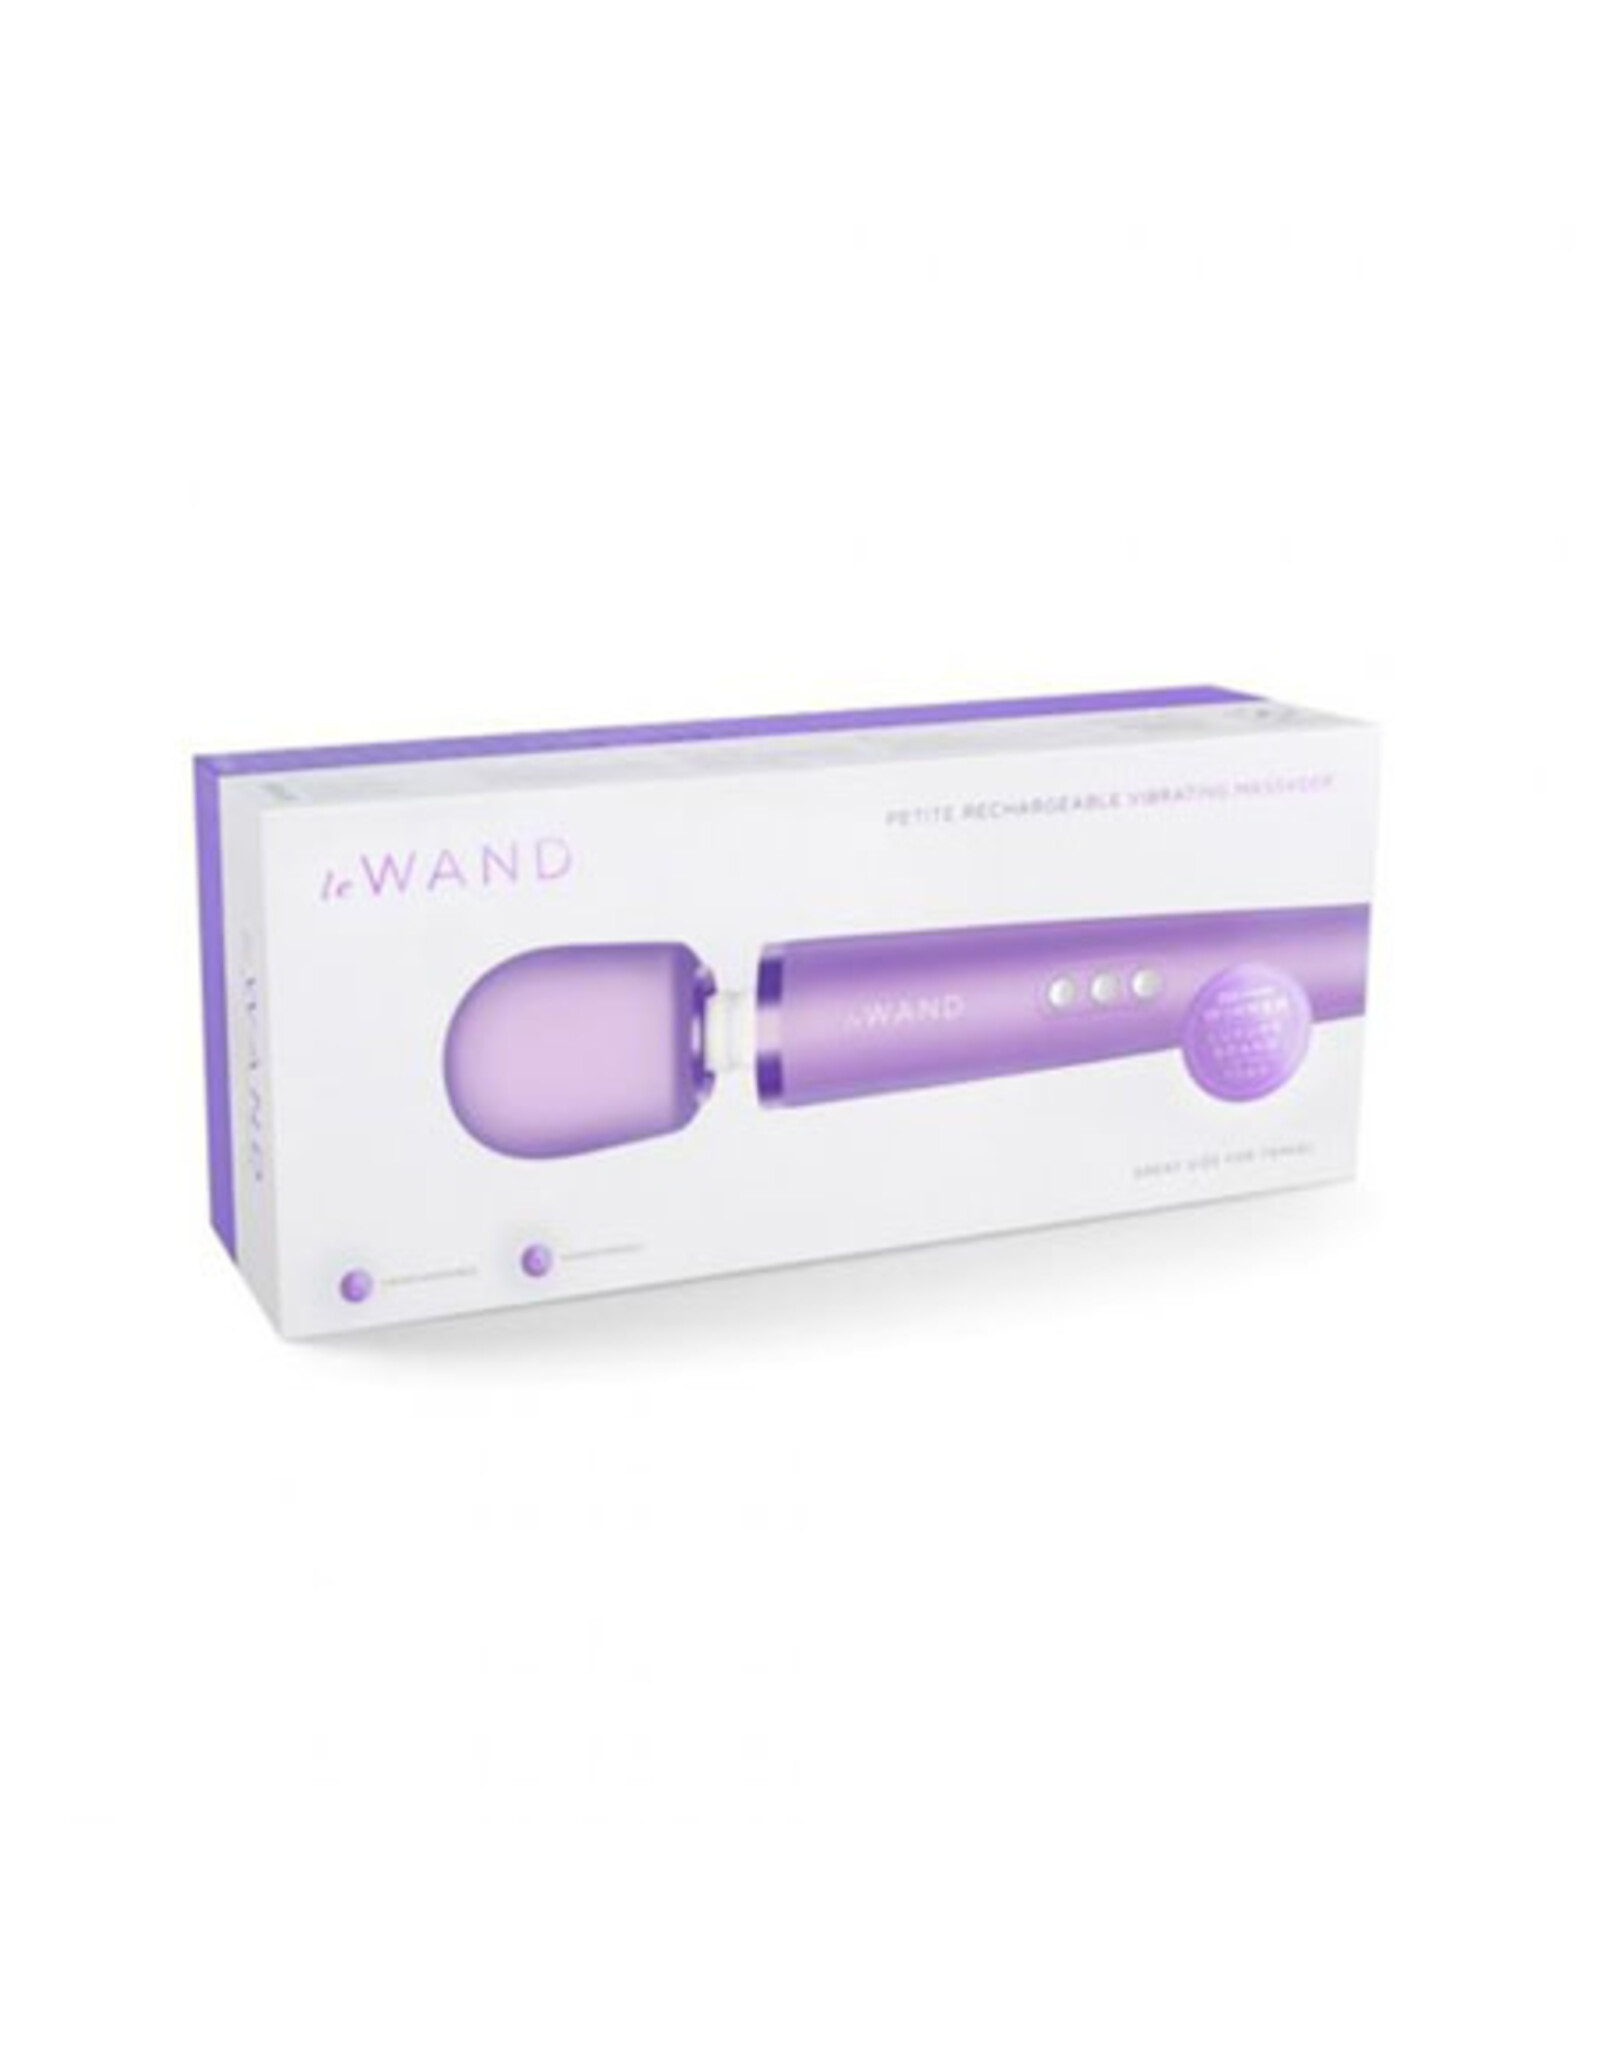 Le Wand Le Wand Petite Rechargeable Massager in Lavender